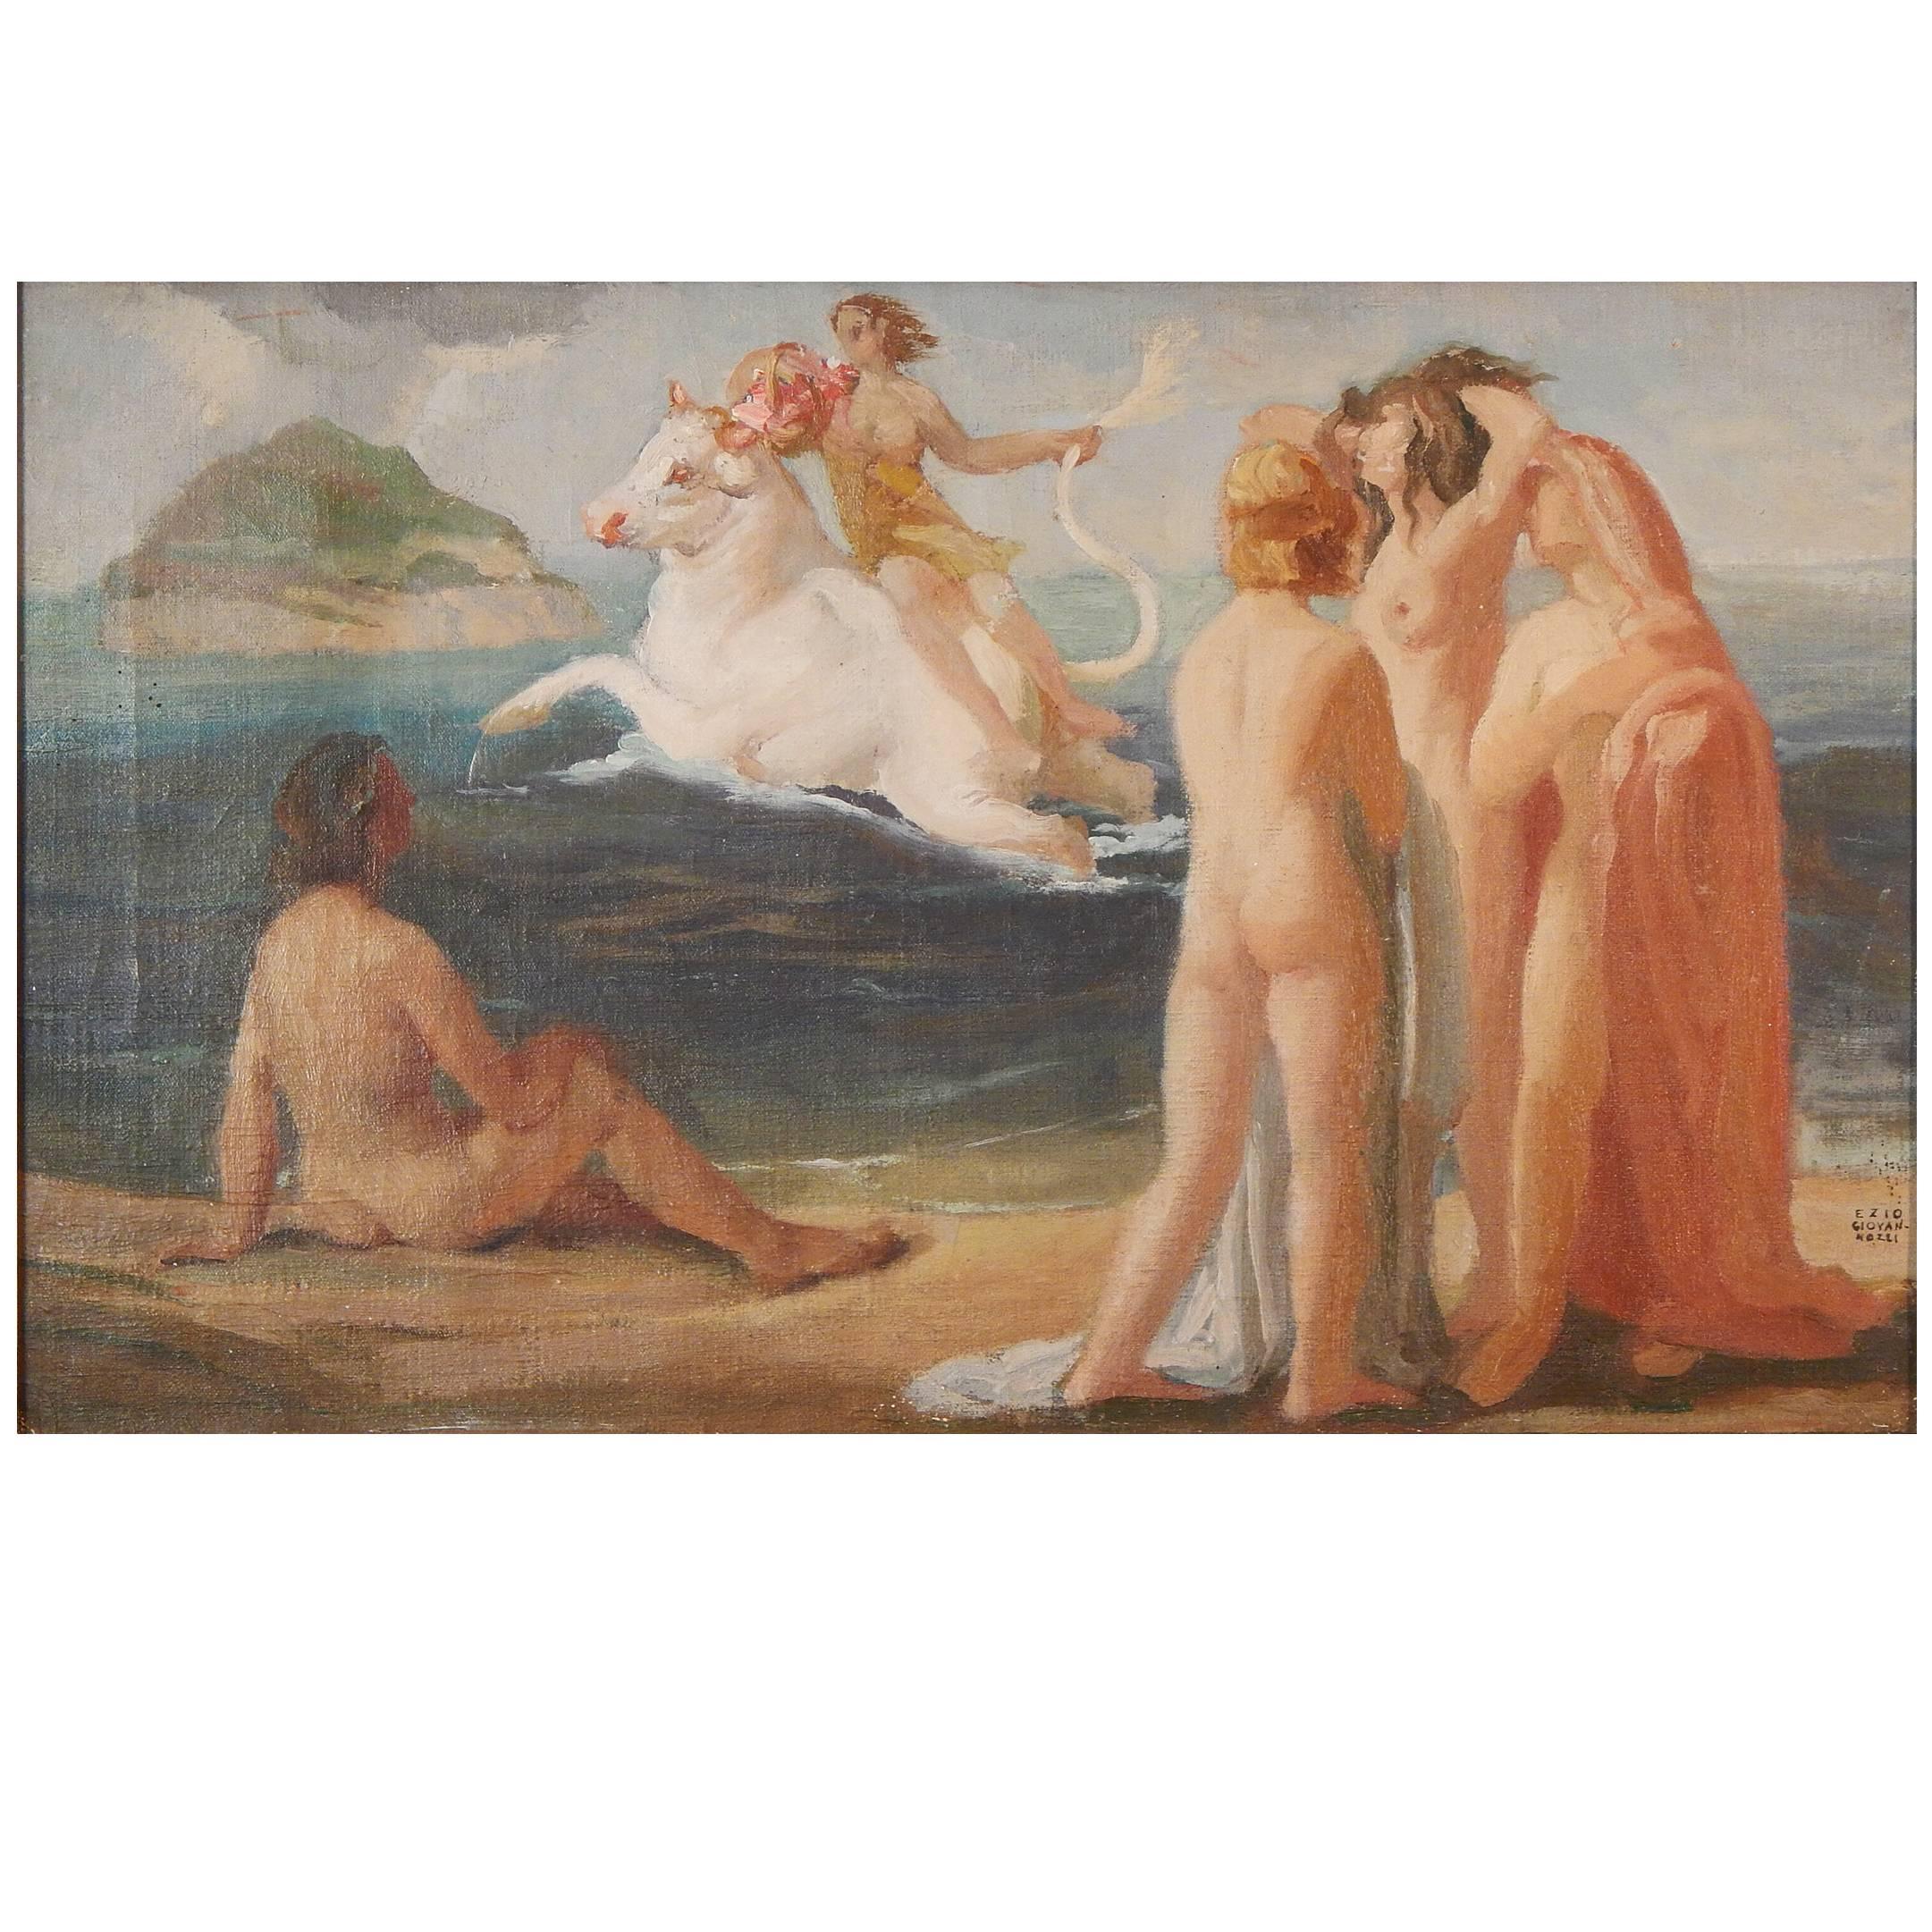 "Europa Spirited off to Crete, " Important Art Deco Mural Study by Giovannozzi